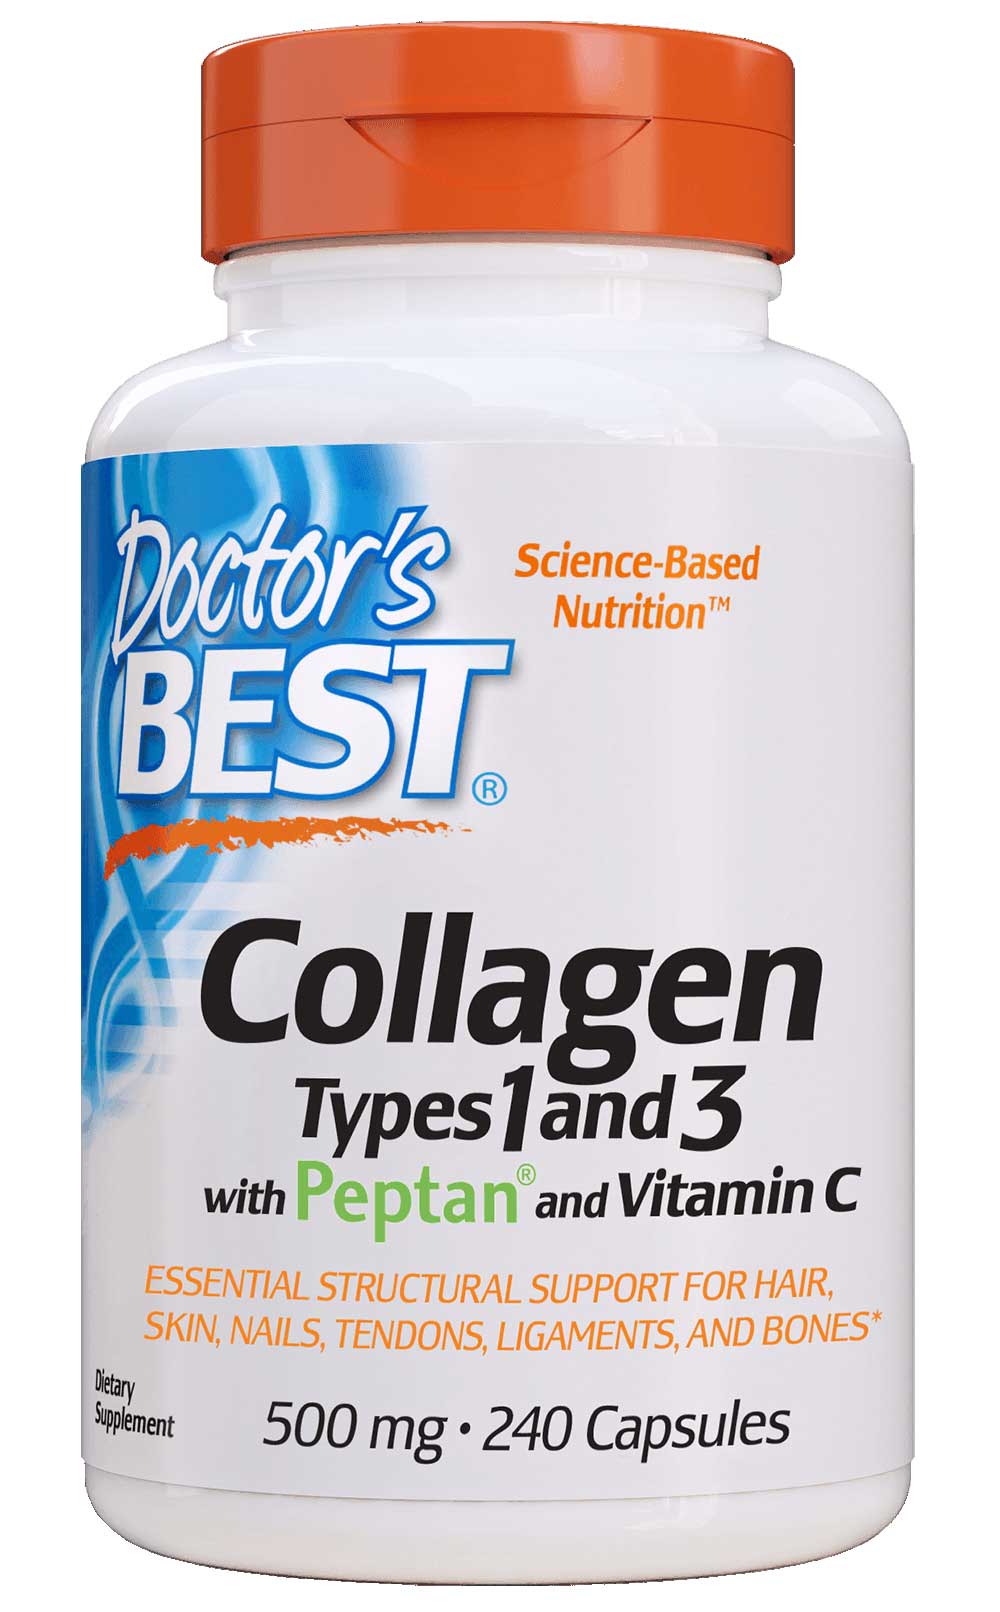 Doctor's Best Collagen Types 1 & 3 with Peptan and Vitamin C, 500 mg